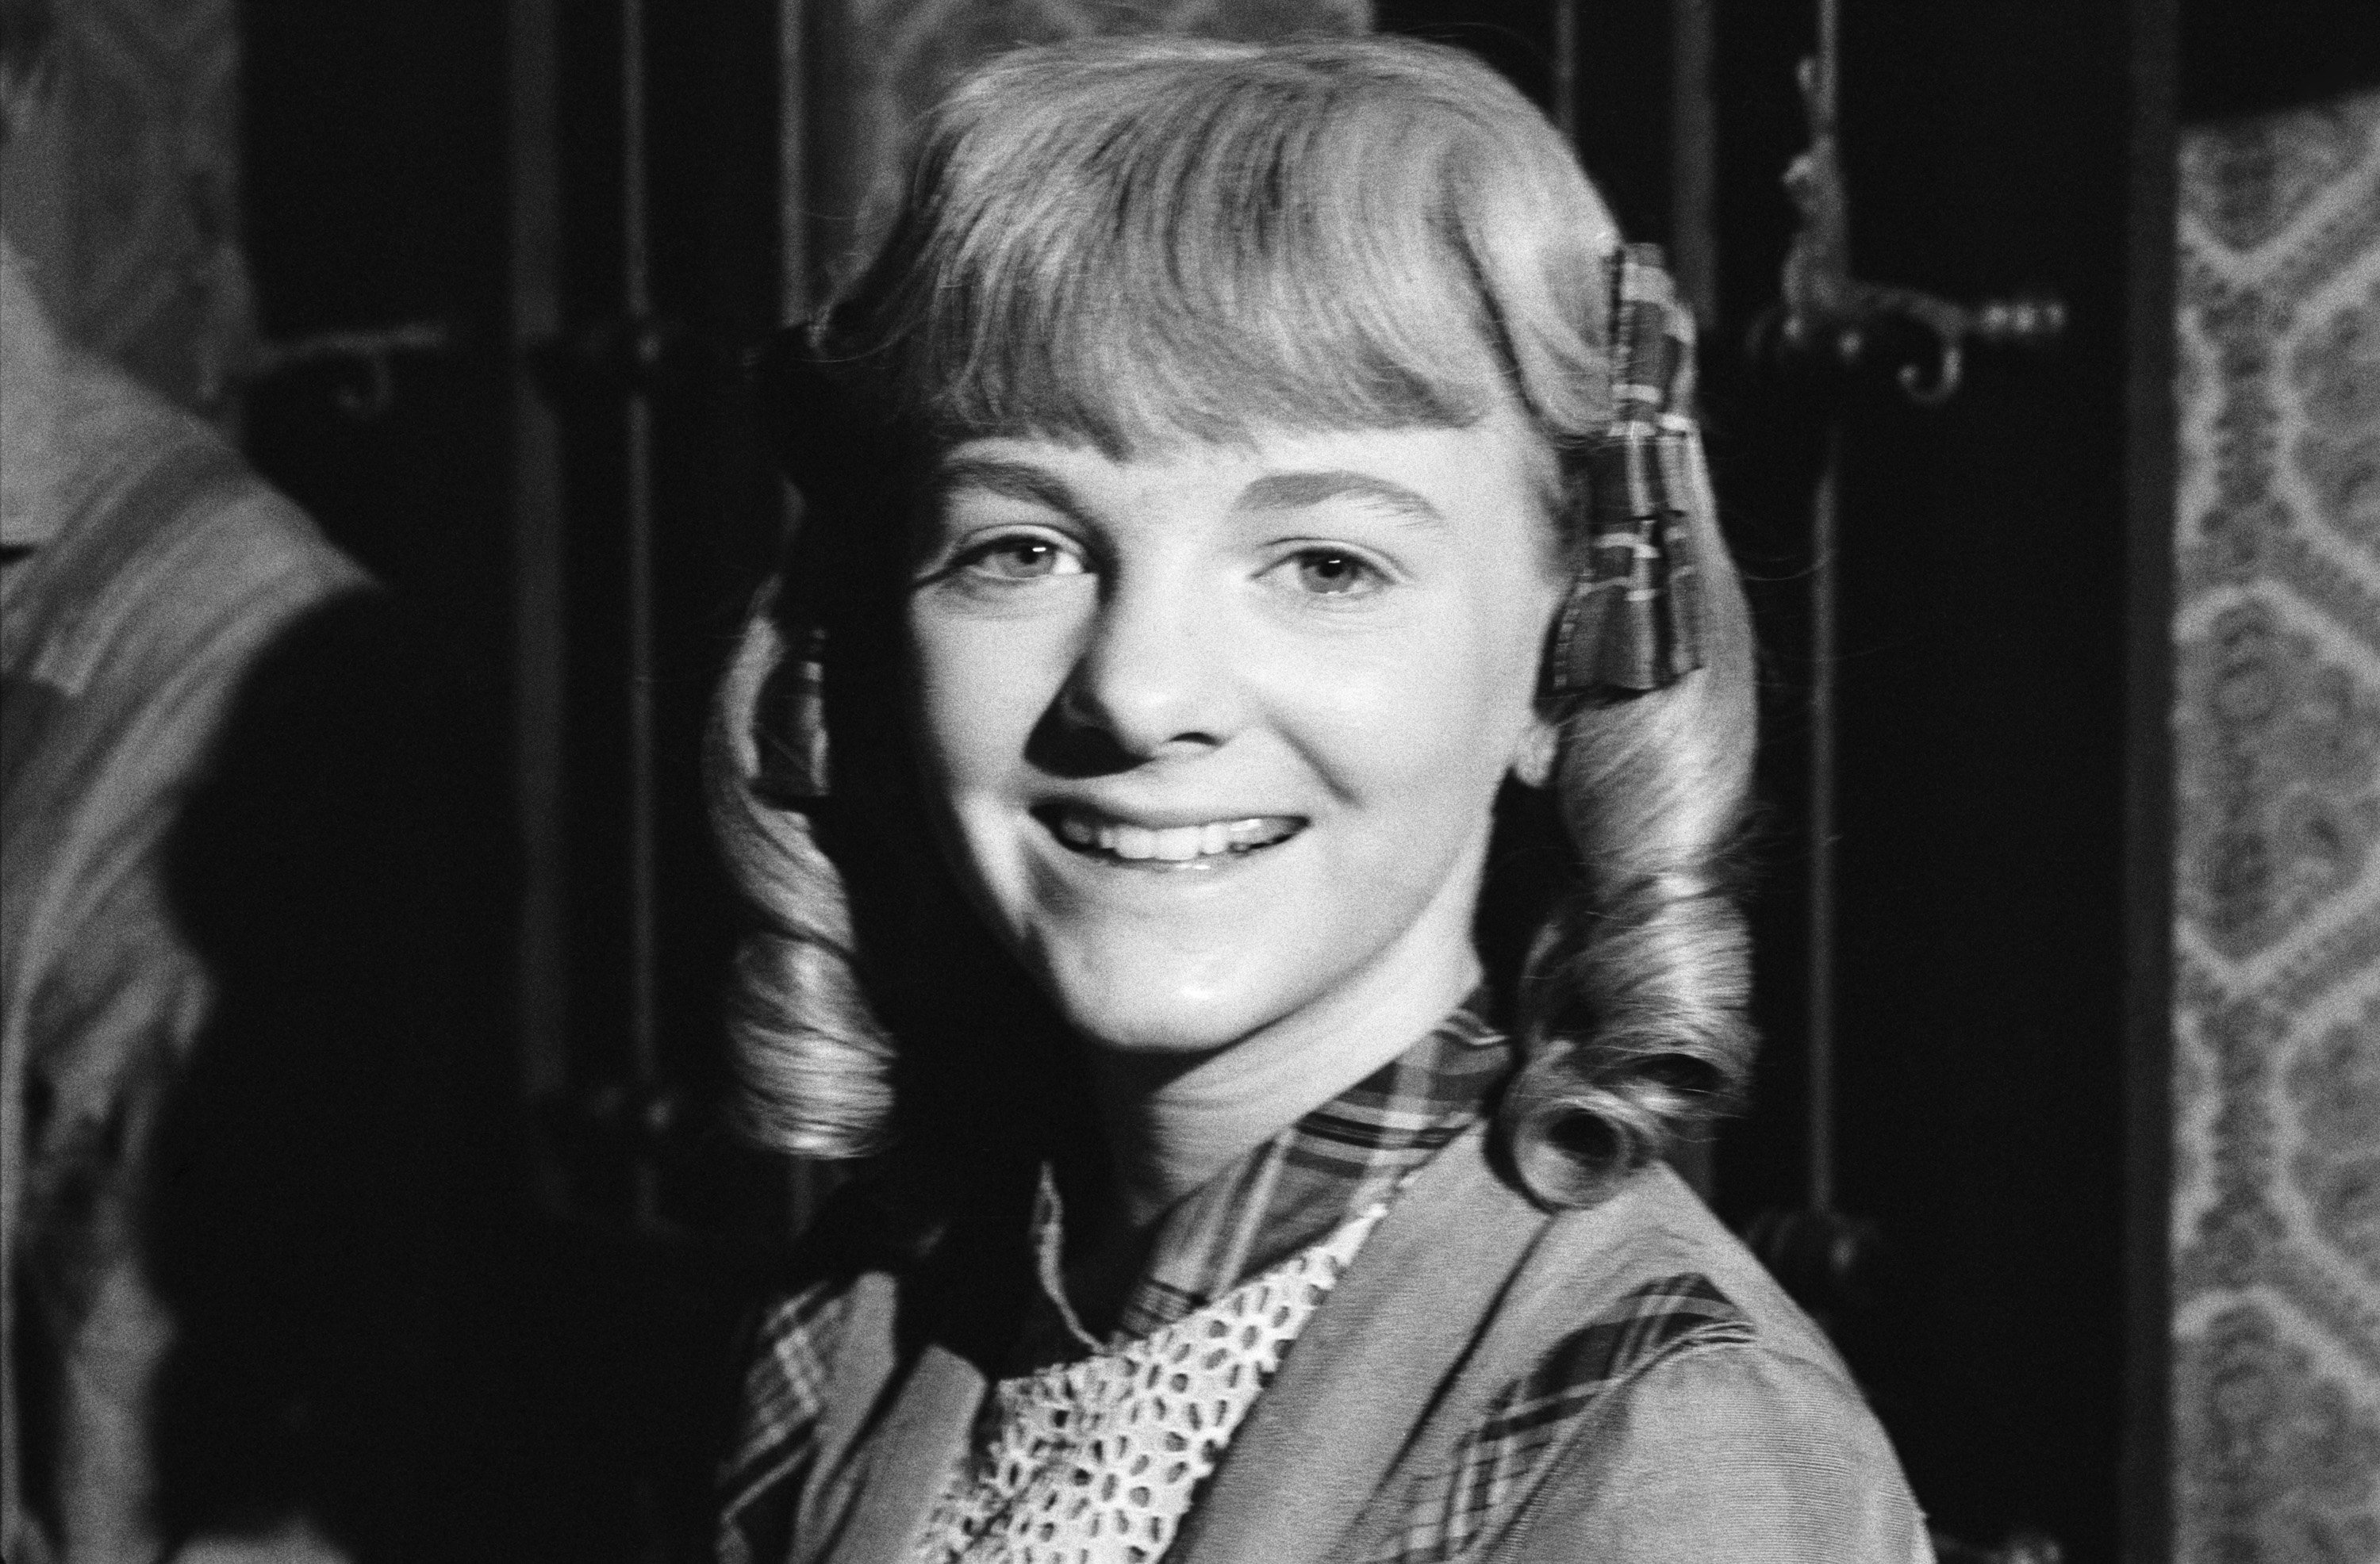 ‘Little House on the Prairie’: Alison Arngrim Described How She Handled Playing a Hated Character